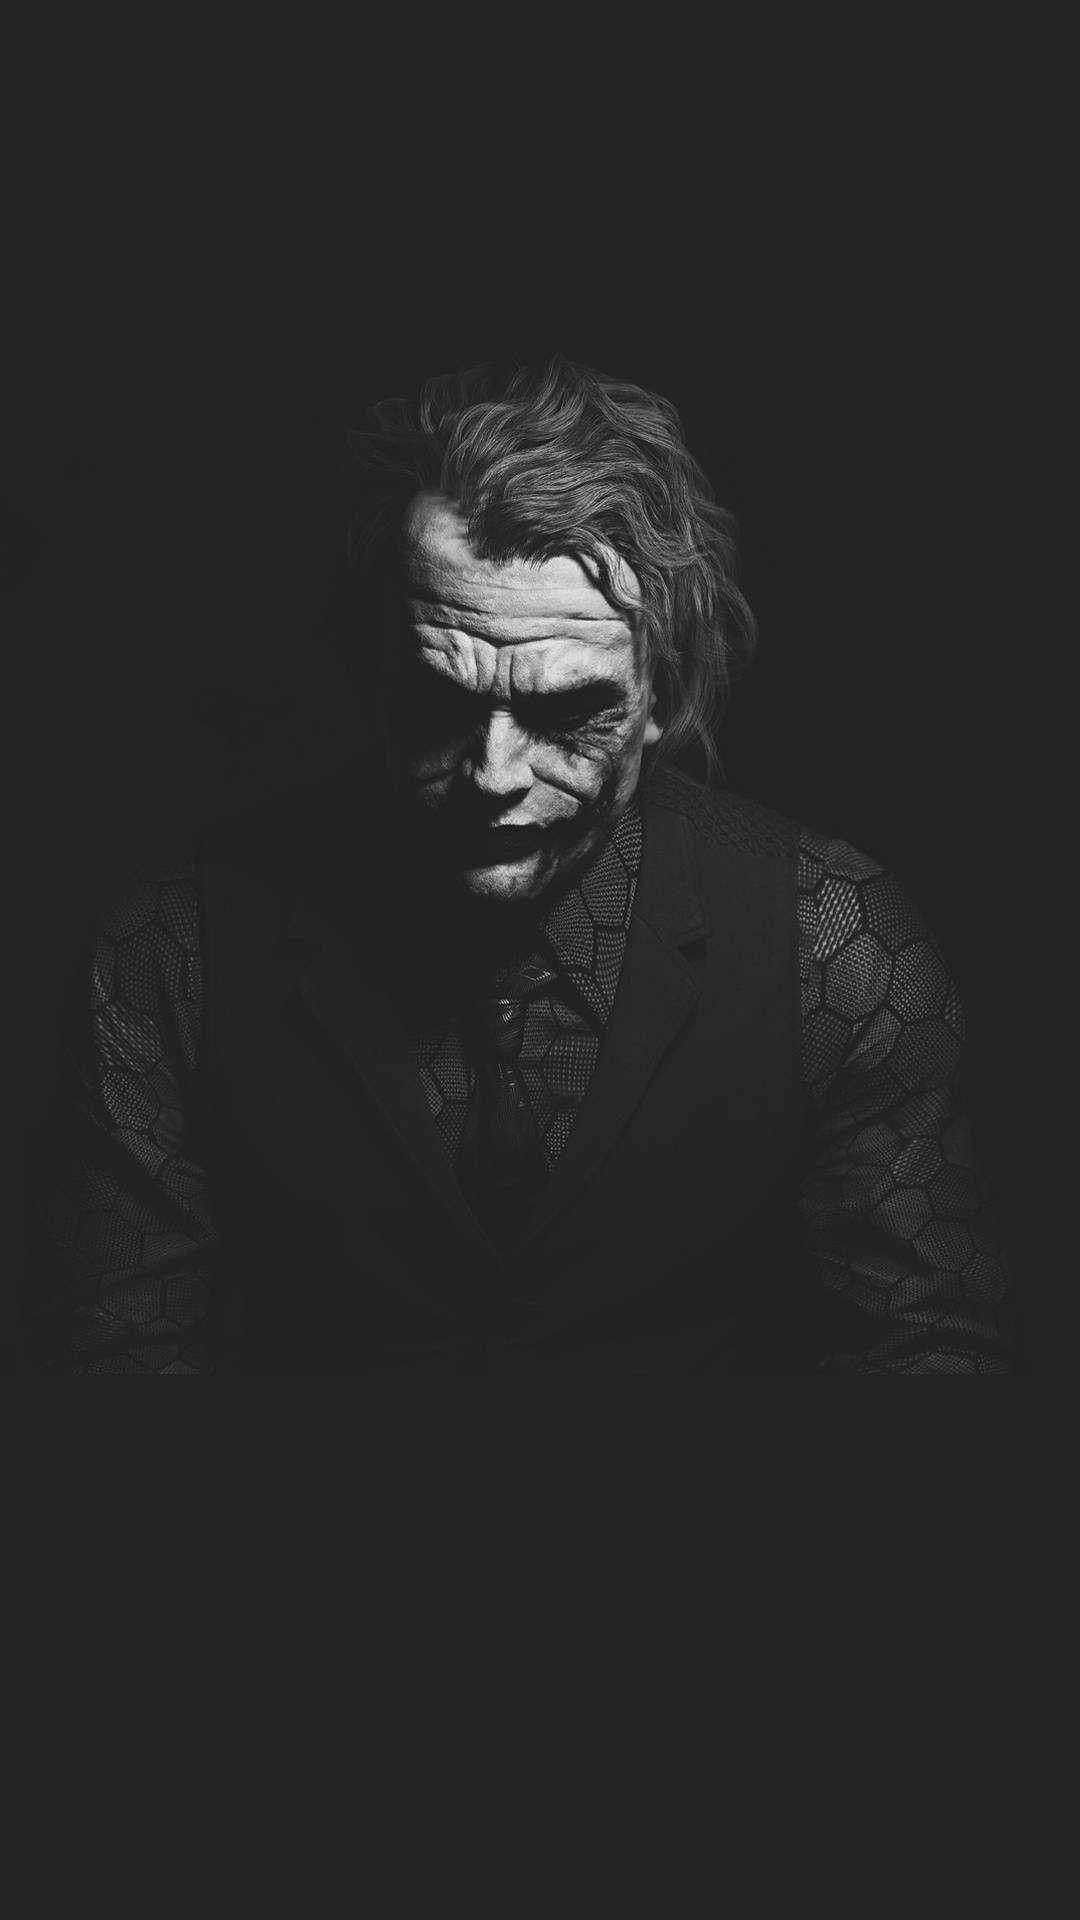 Why So Serious Hd Mobile Wallpapers - Wallpaper Cave